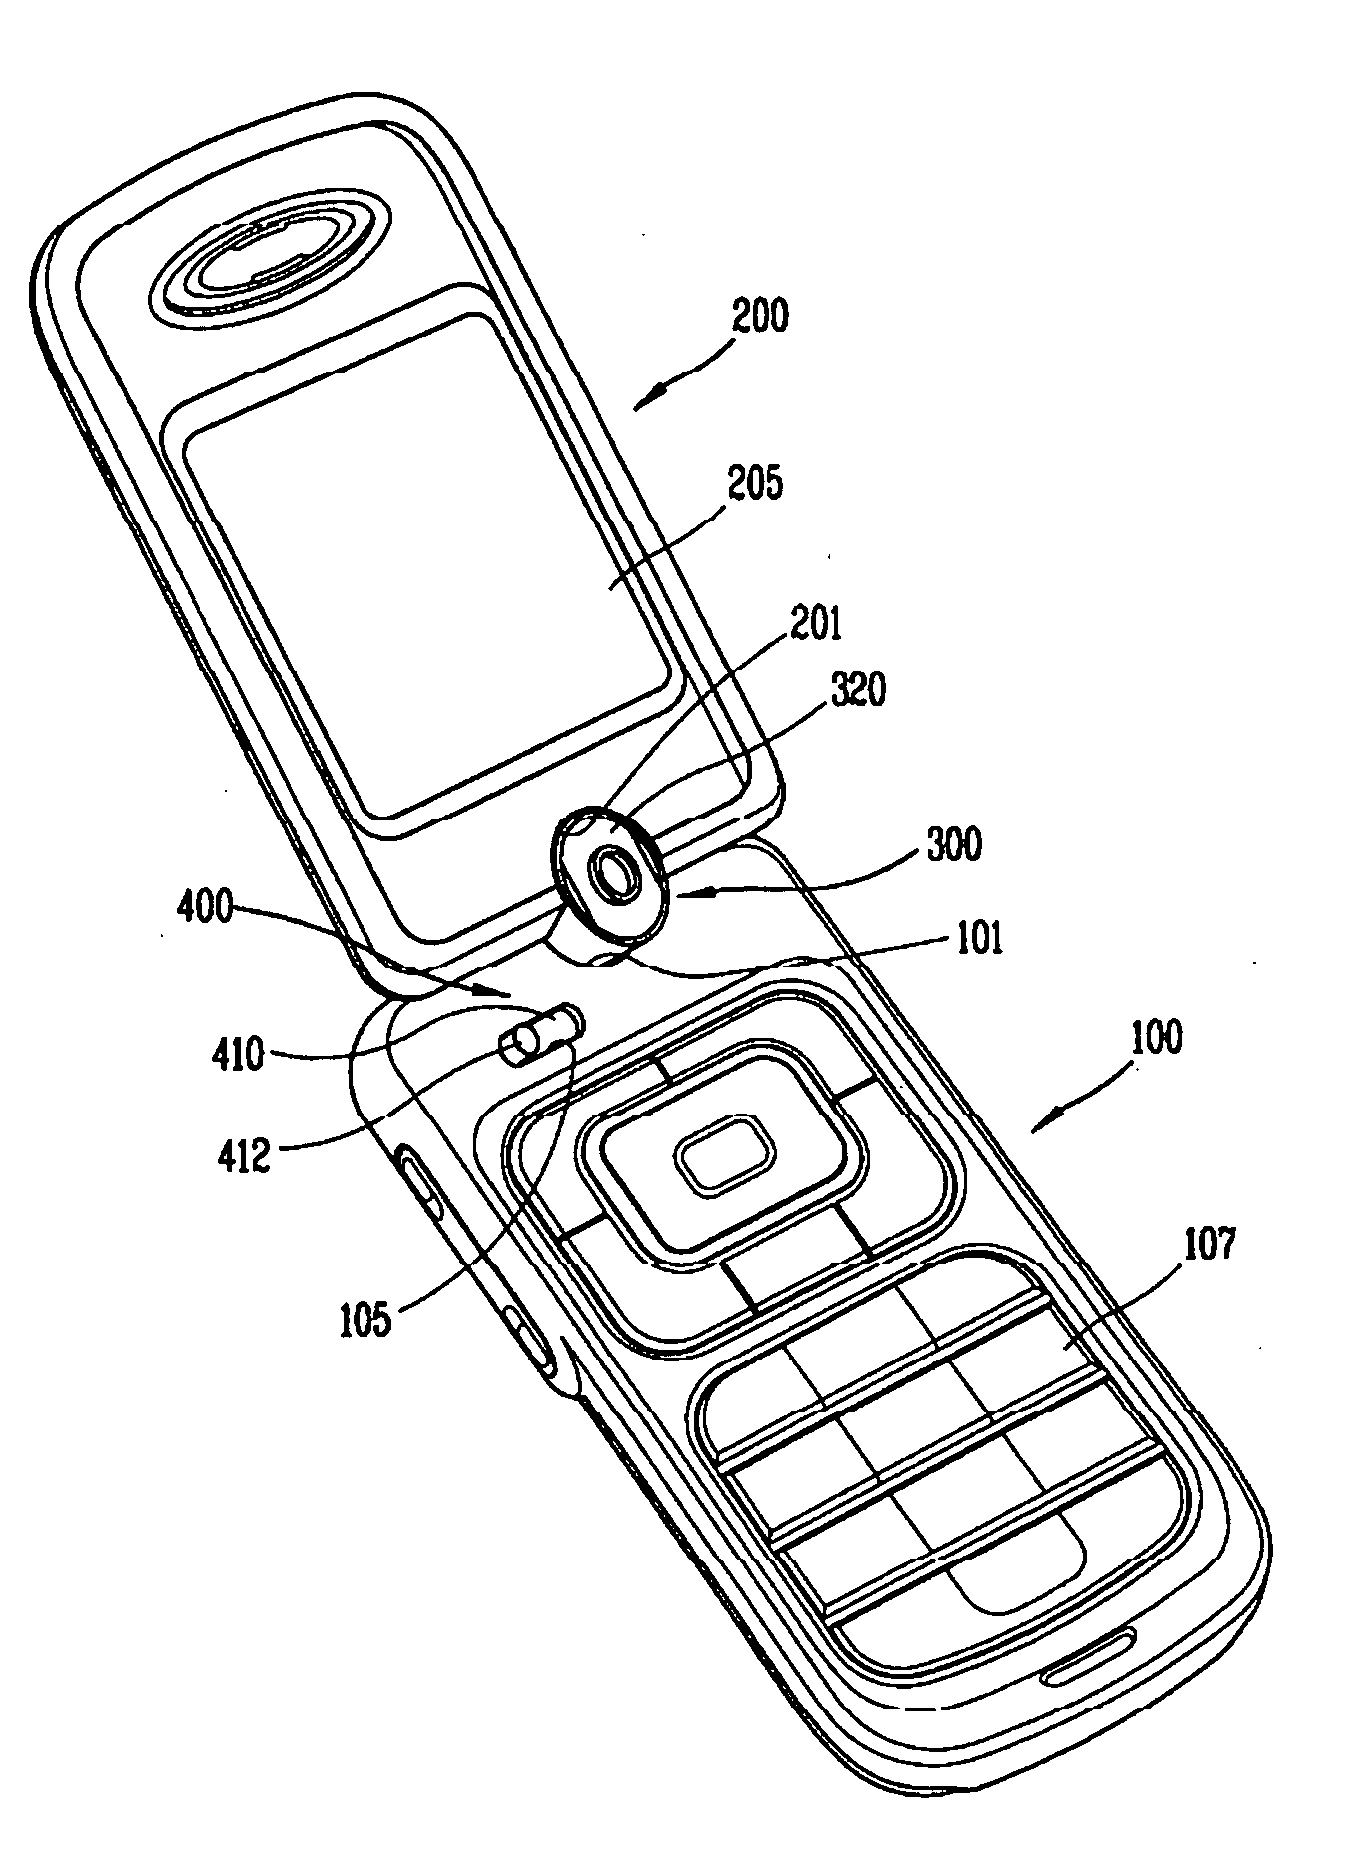 Mobile terminal having a double rotation structure